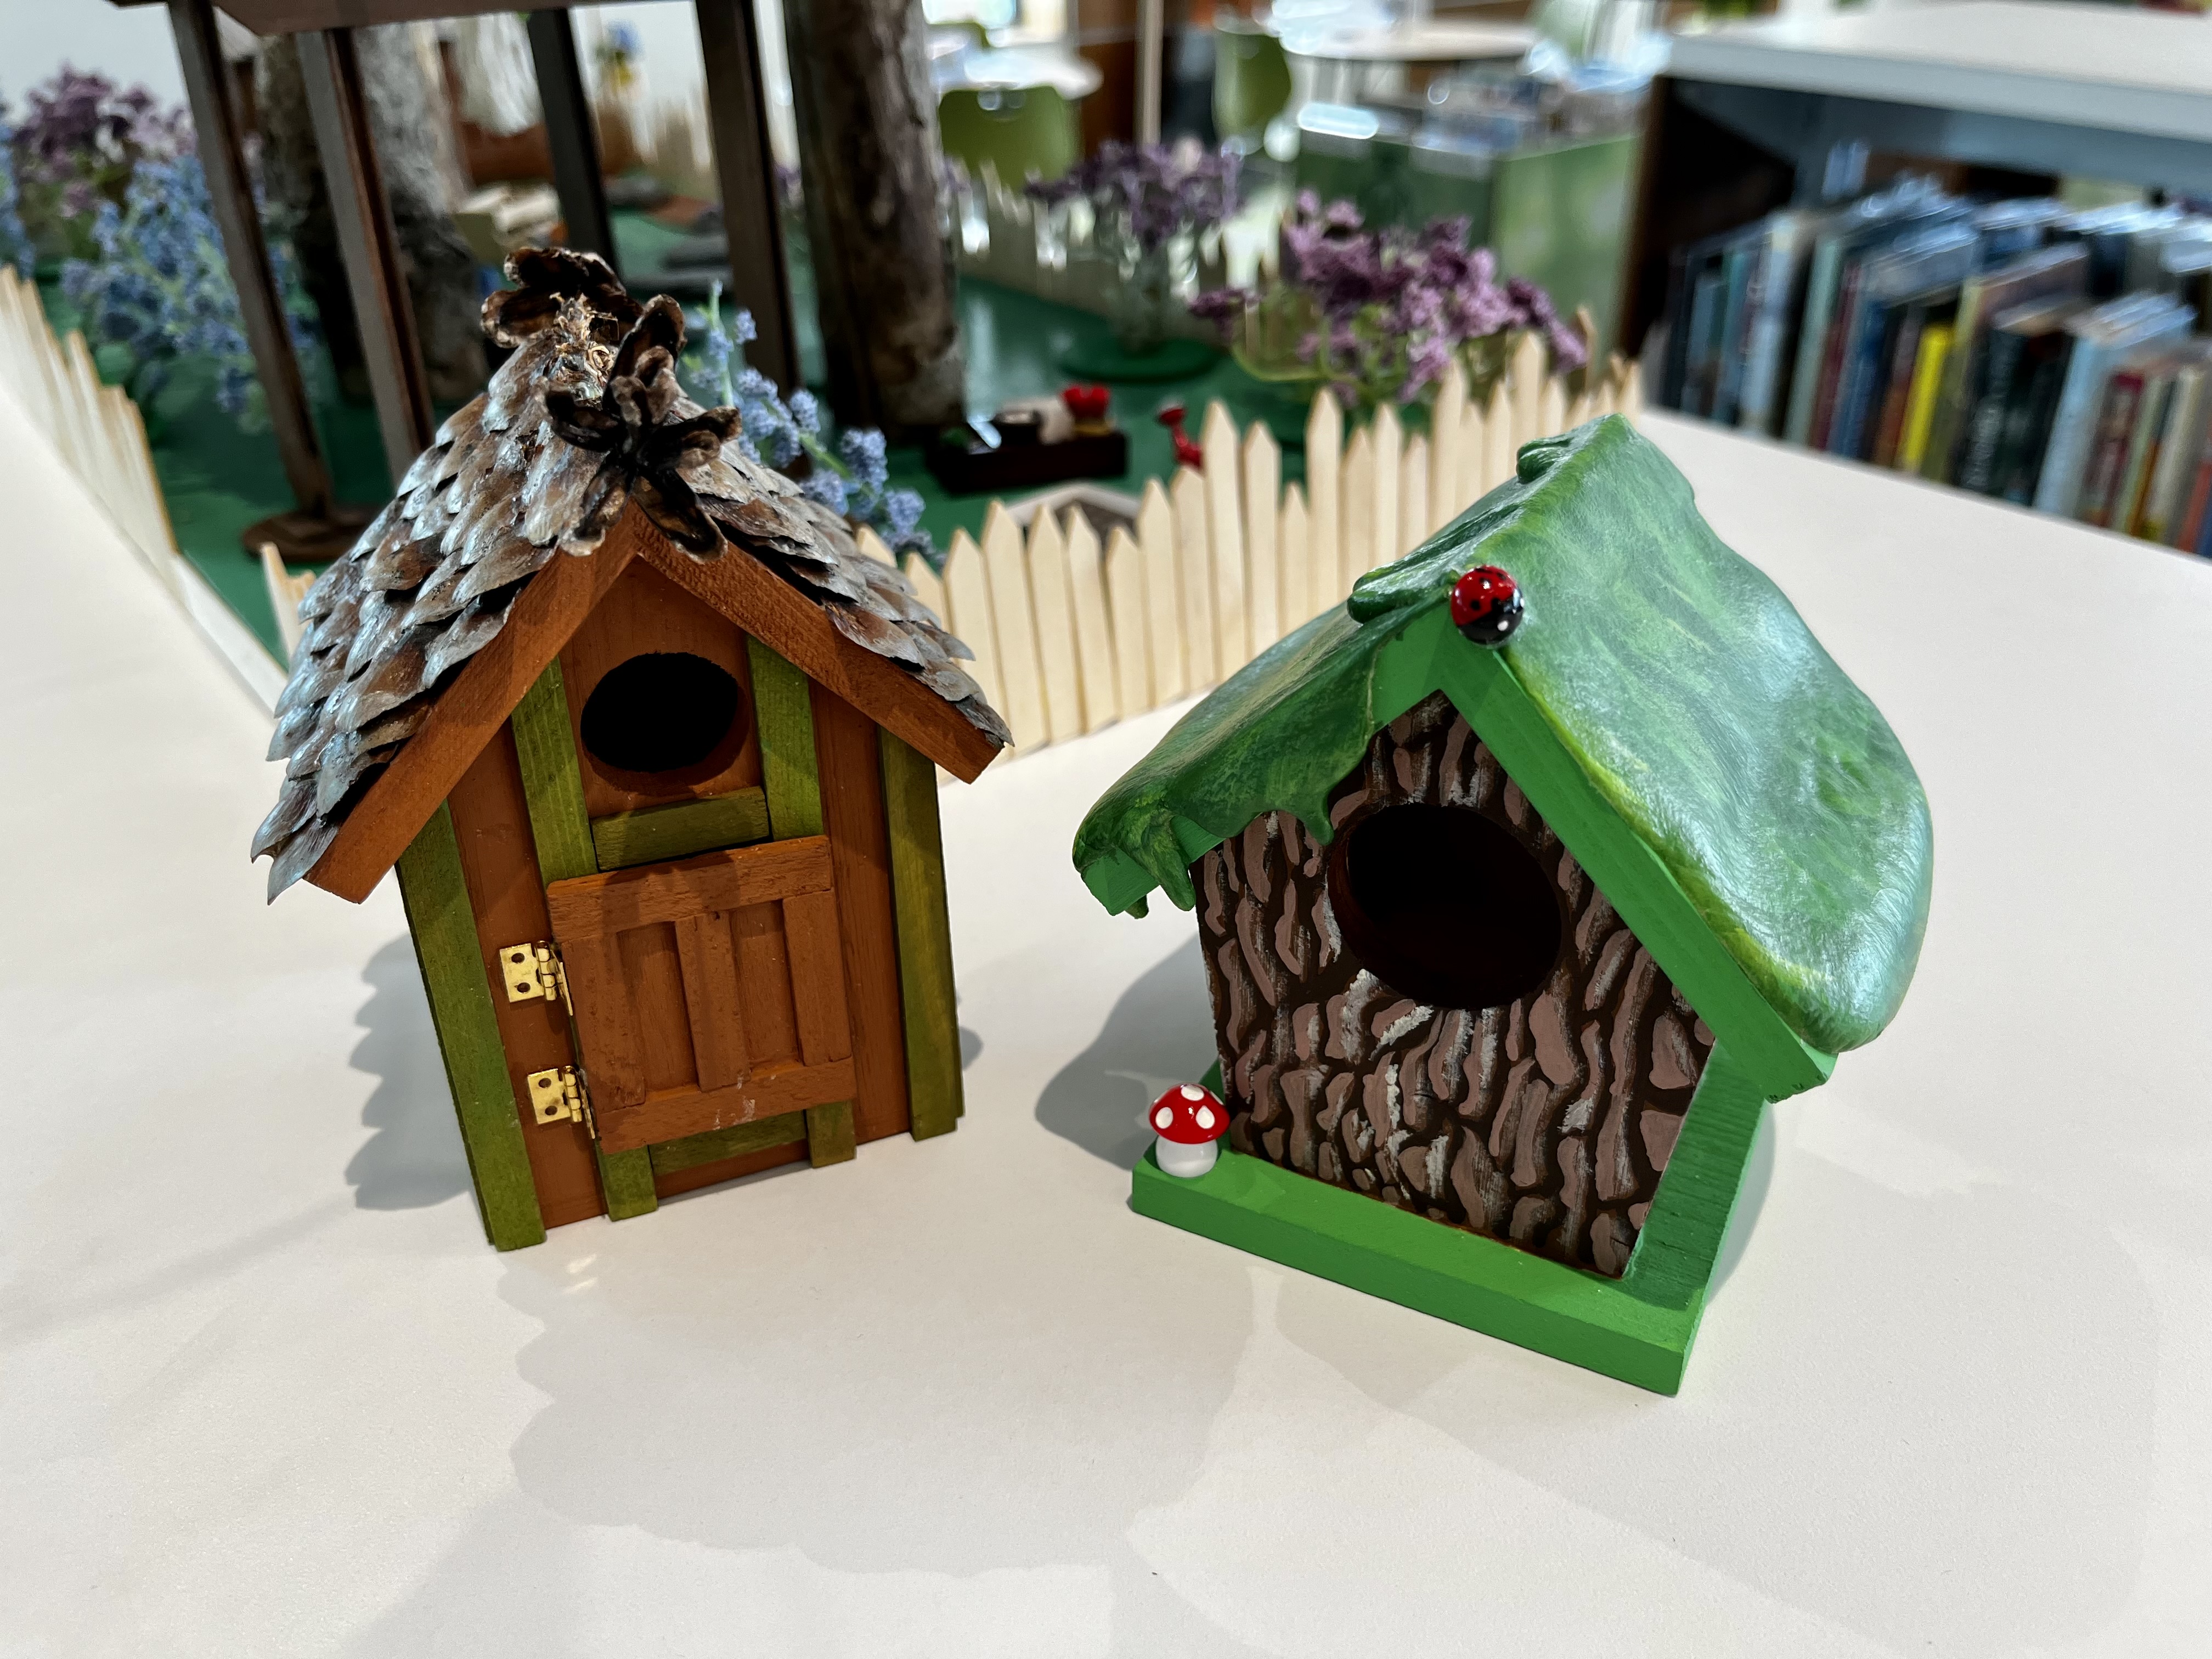 Two small wooden birdhouses painted in various colors